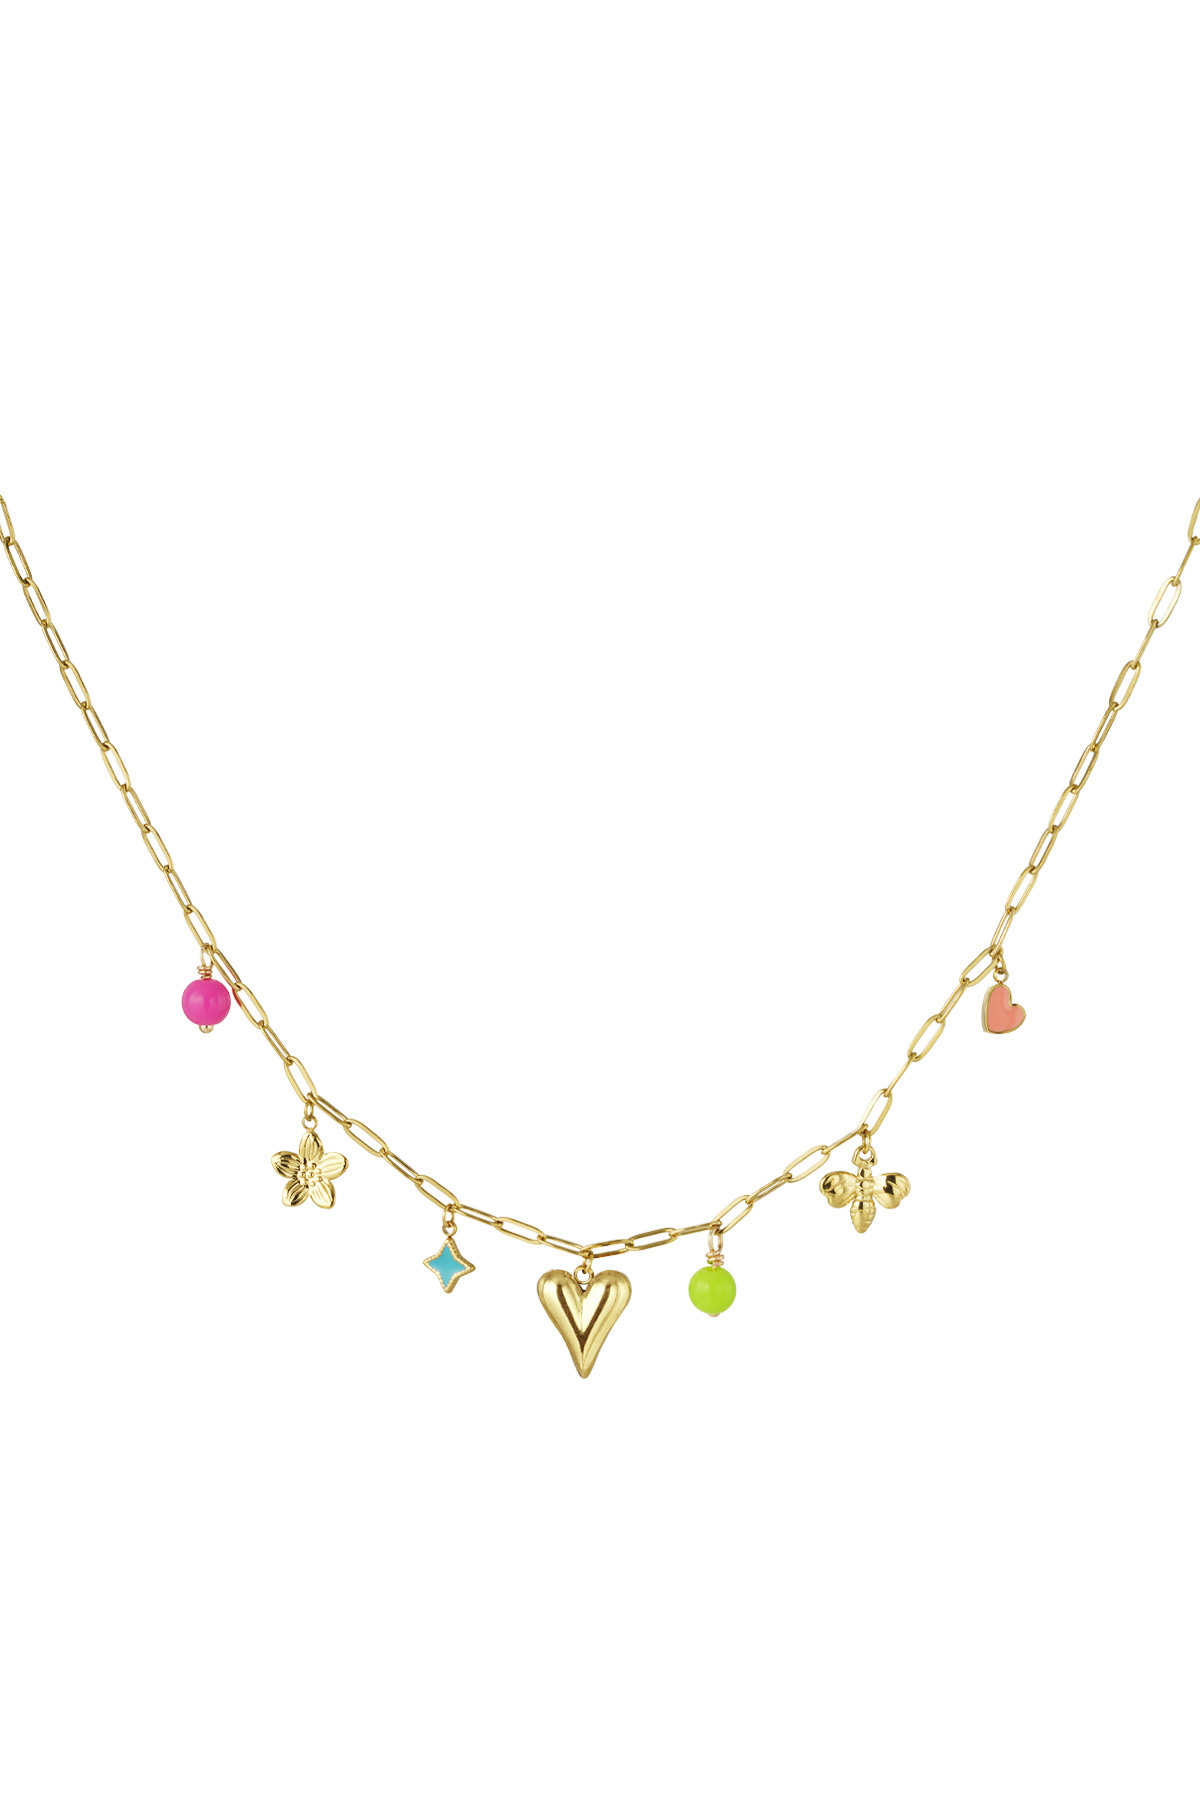 Charm necklace with colorful charms - gold 